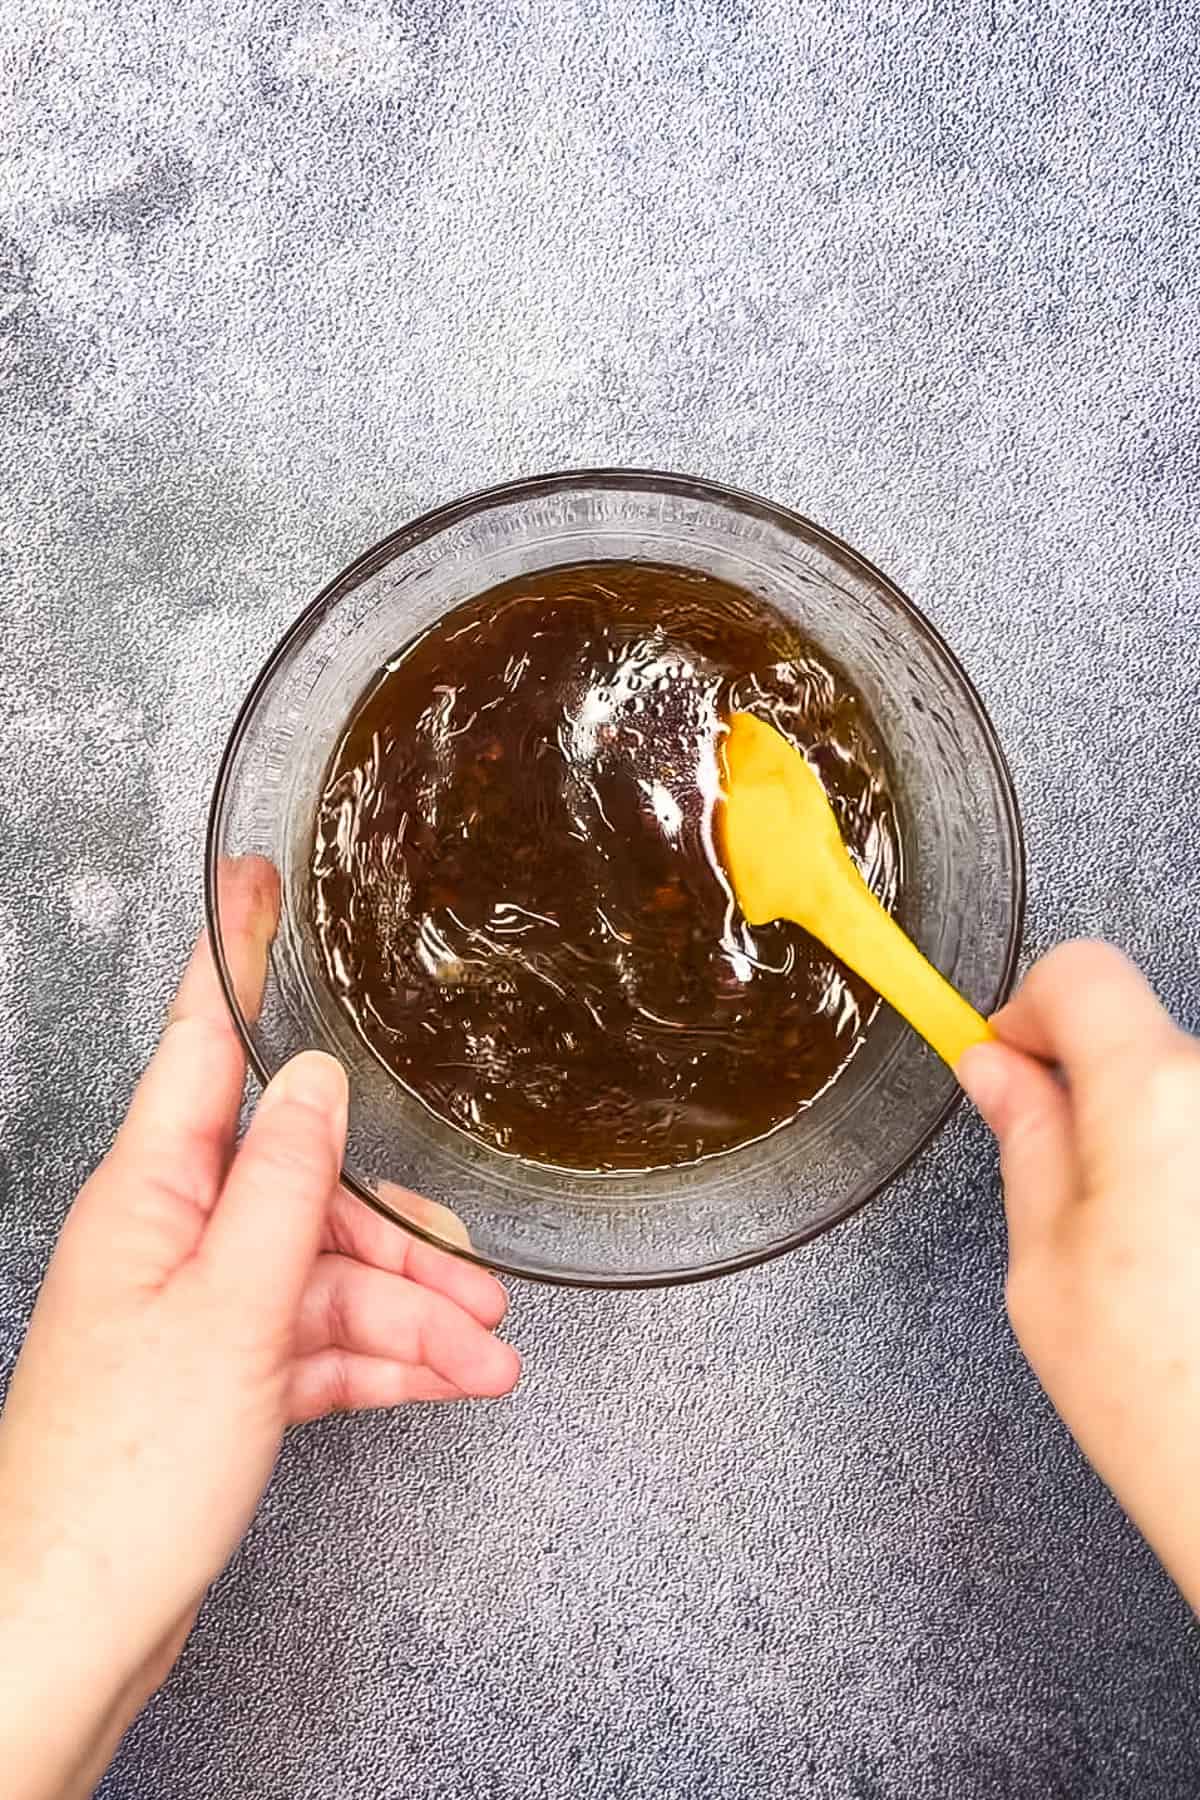 A person holding a yellow spoon over a bowl of brown sauce, serving crispy chilli beef.